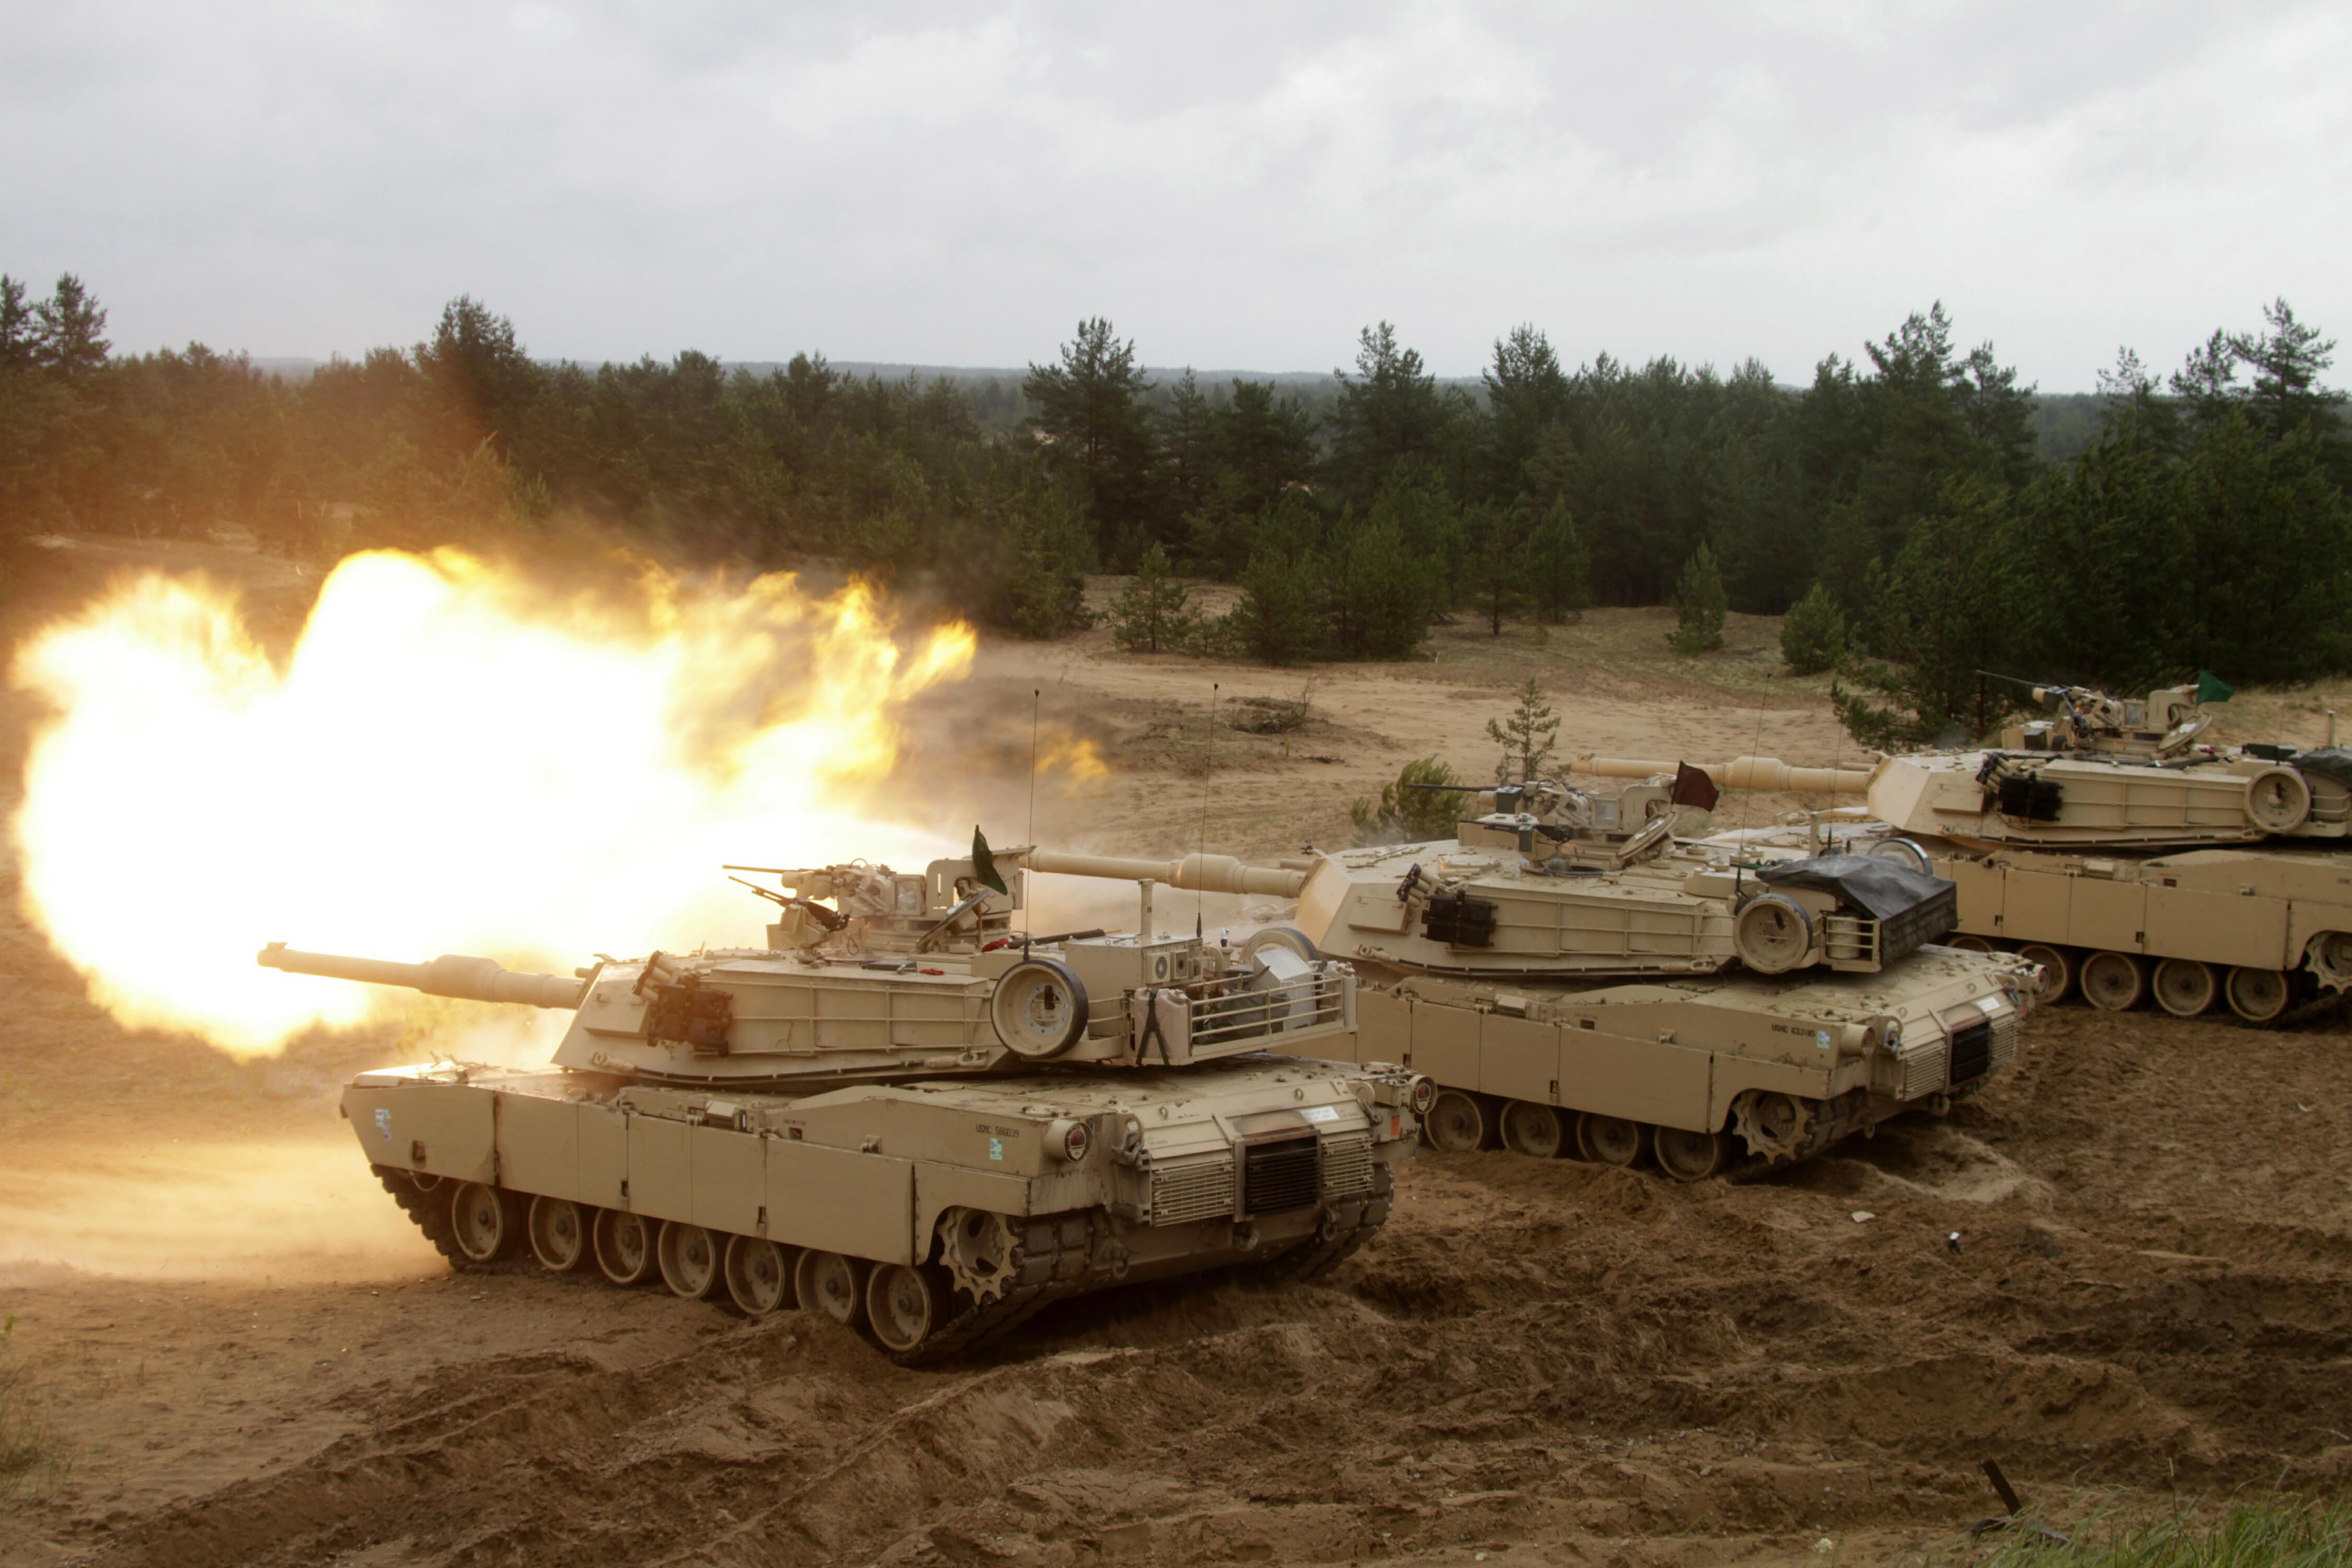 A US Army Abrams tank fires during the Saber Strike military exercises in Adazi military training area, Latvia